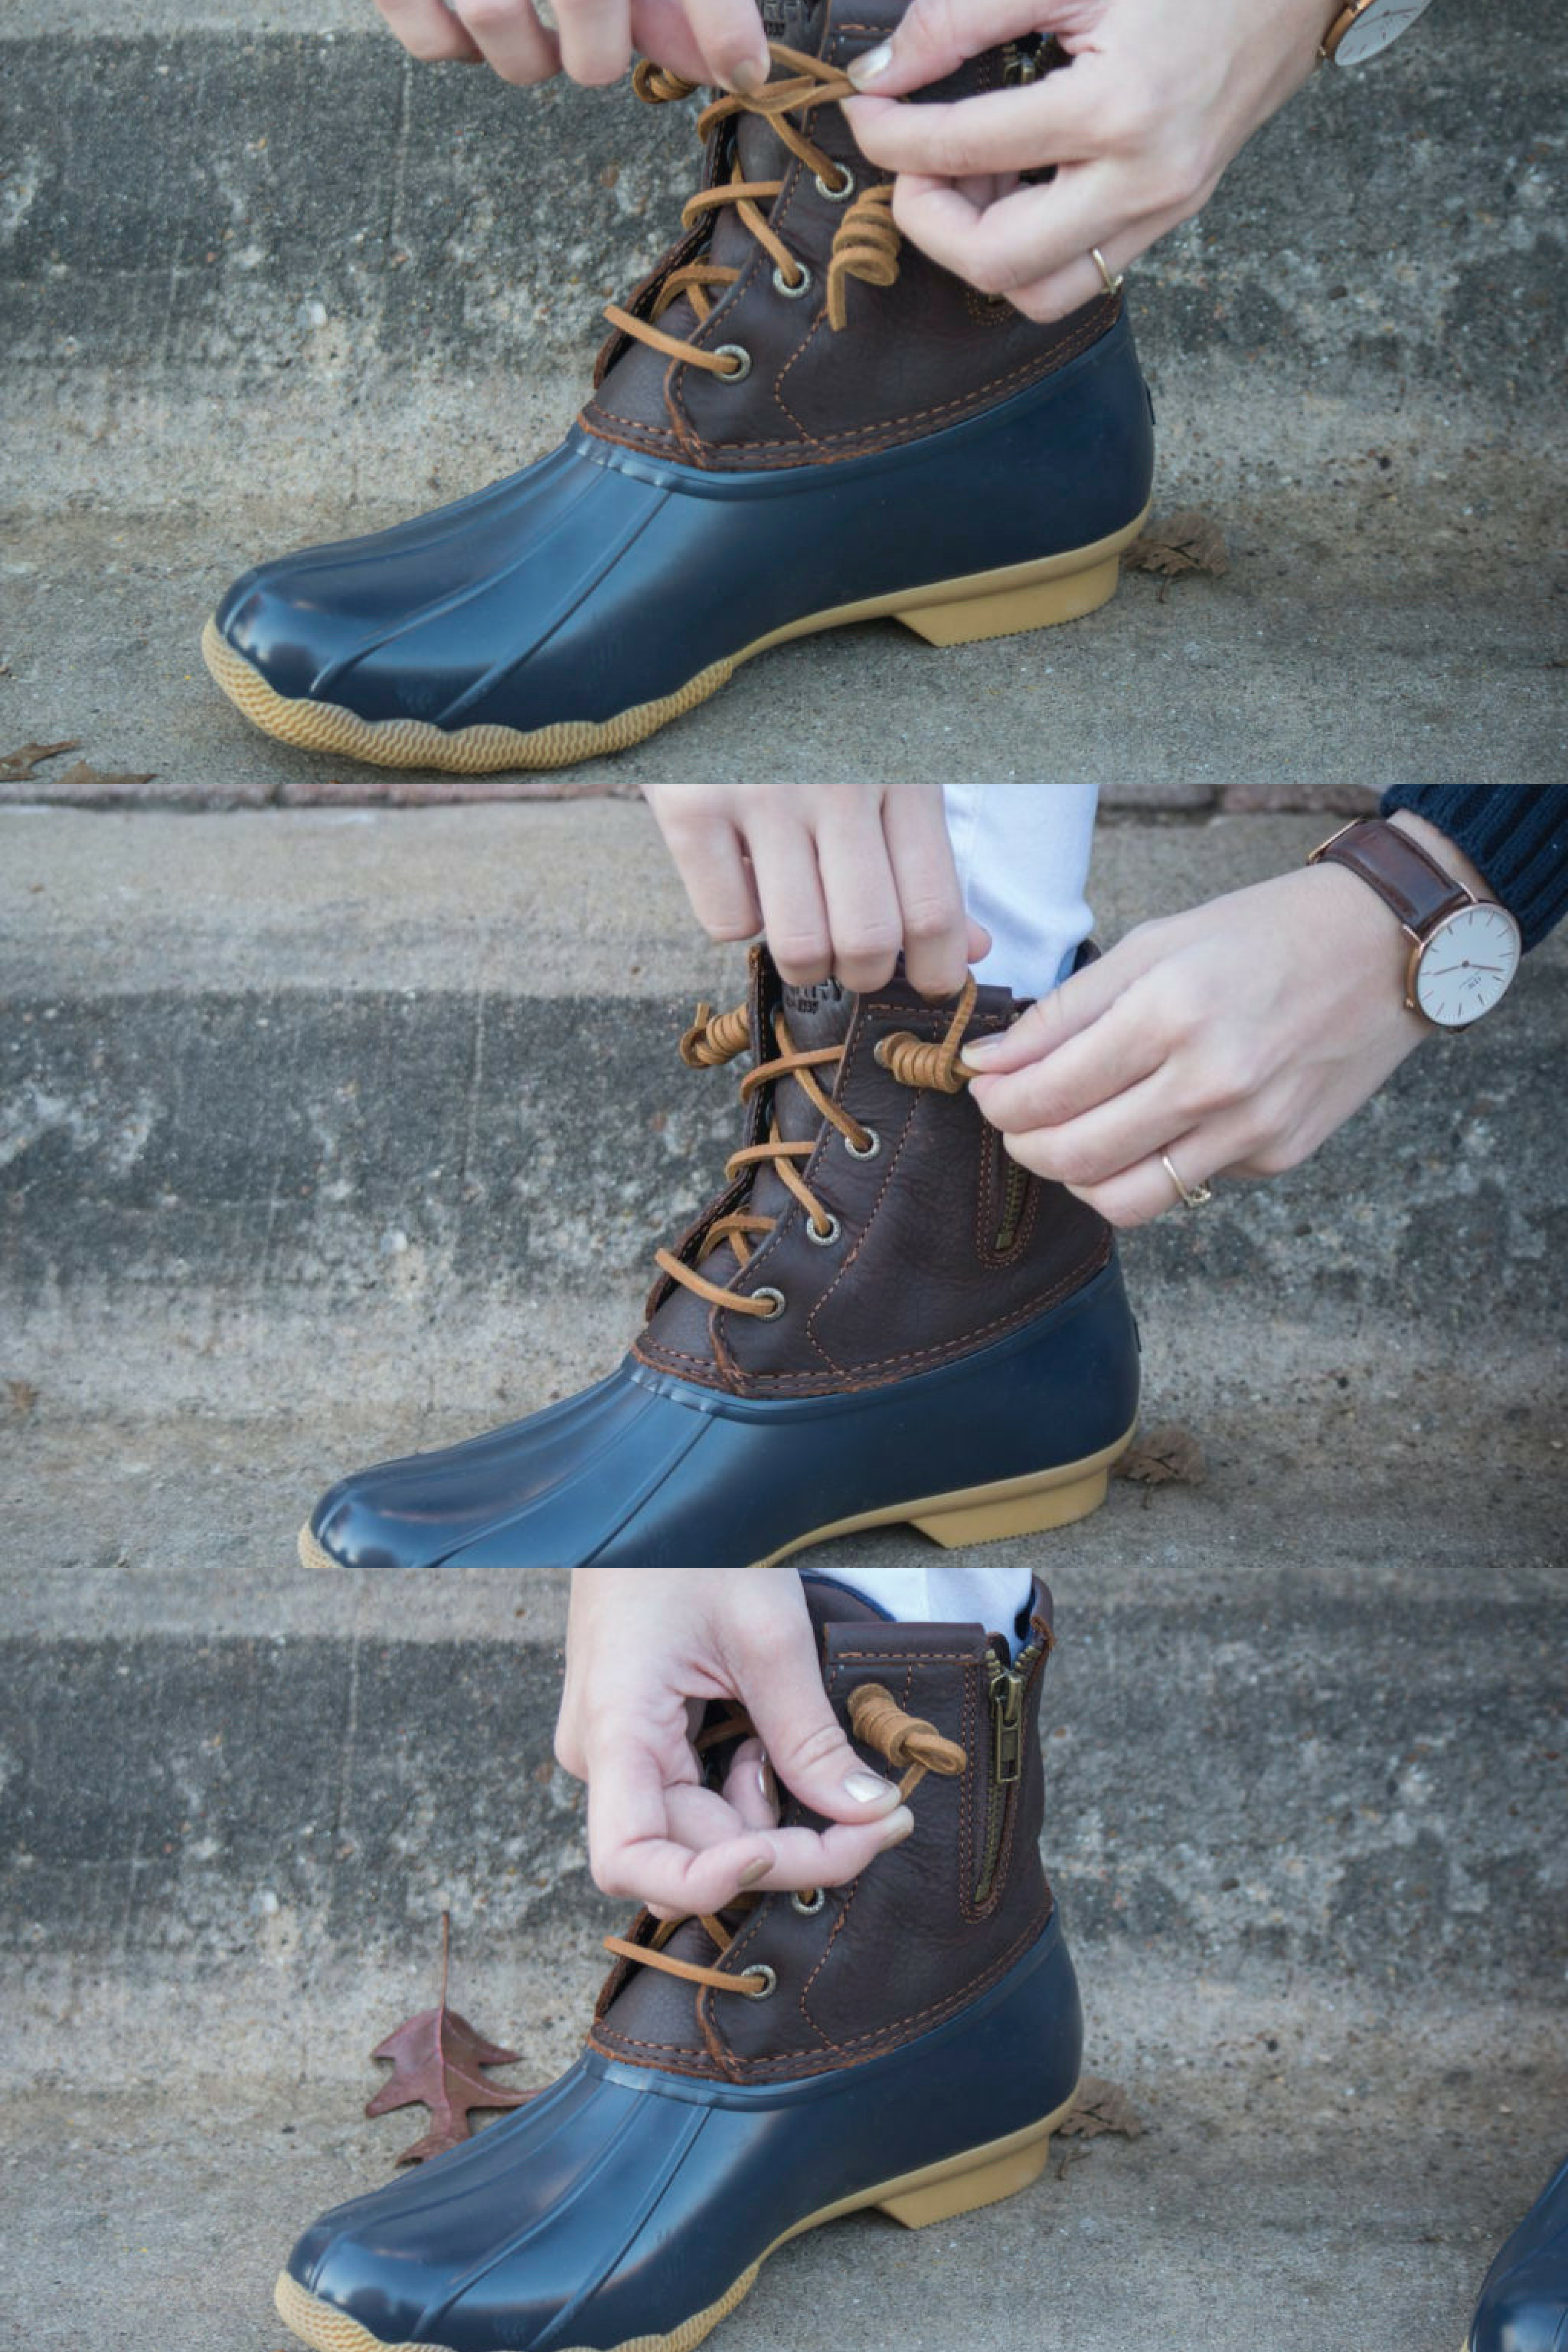 sperry duck boots without laces